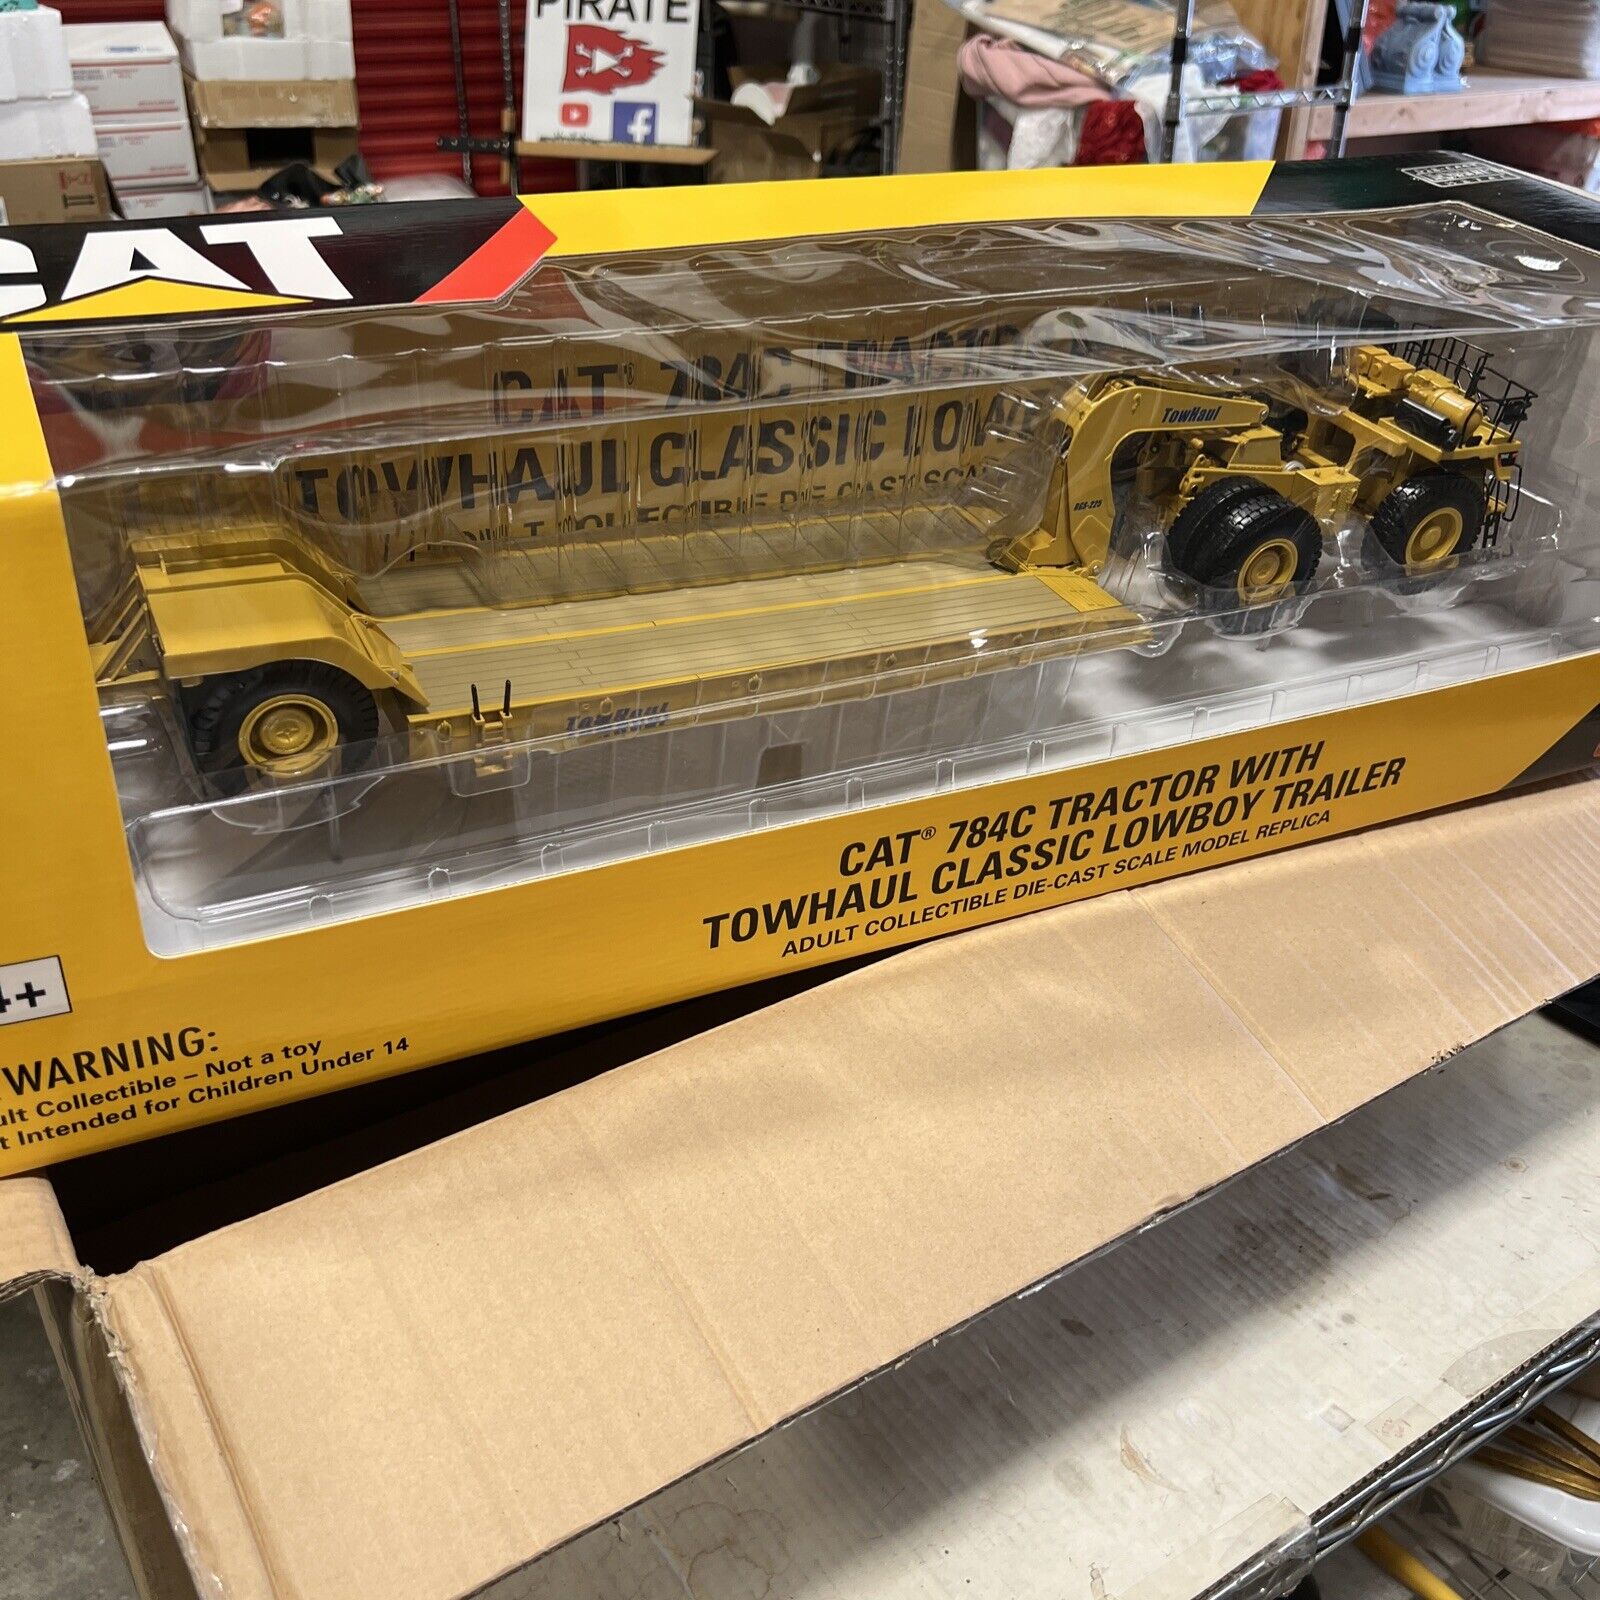 Cat 784C Tractor With Towhaul Classic Lowboy Trailer By Norscot 1/50 Scale